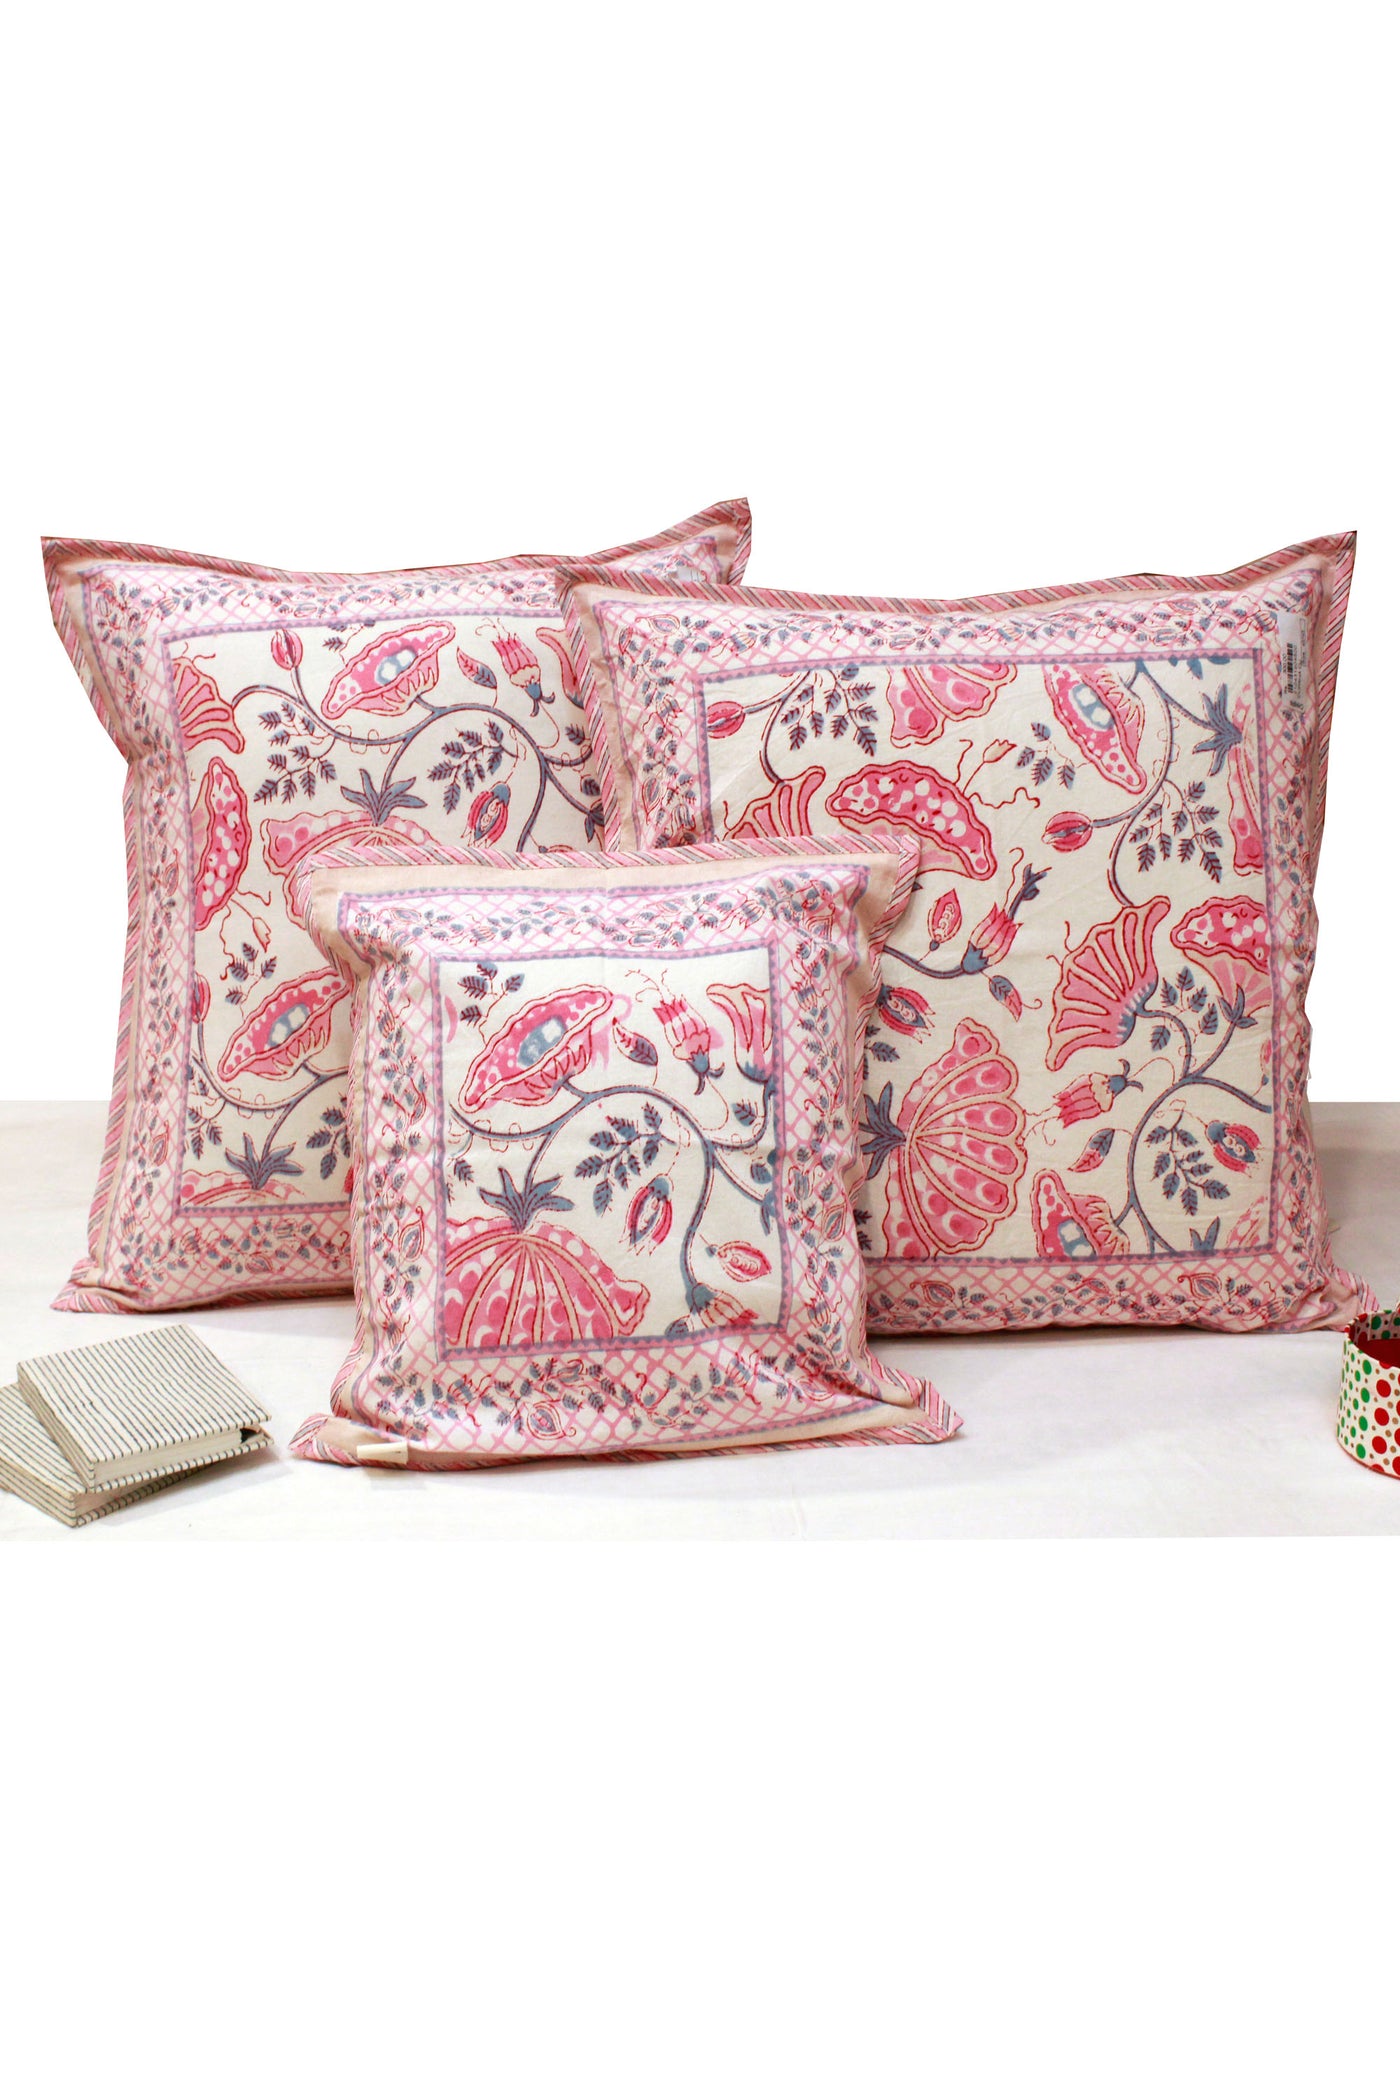 Cotton Lotus Flower Jaal Hand Block Printed Cushion Cover in Kashish Pink